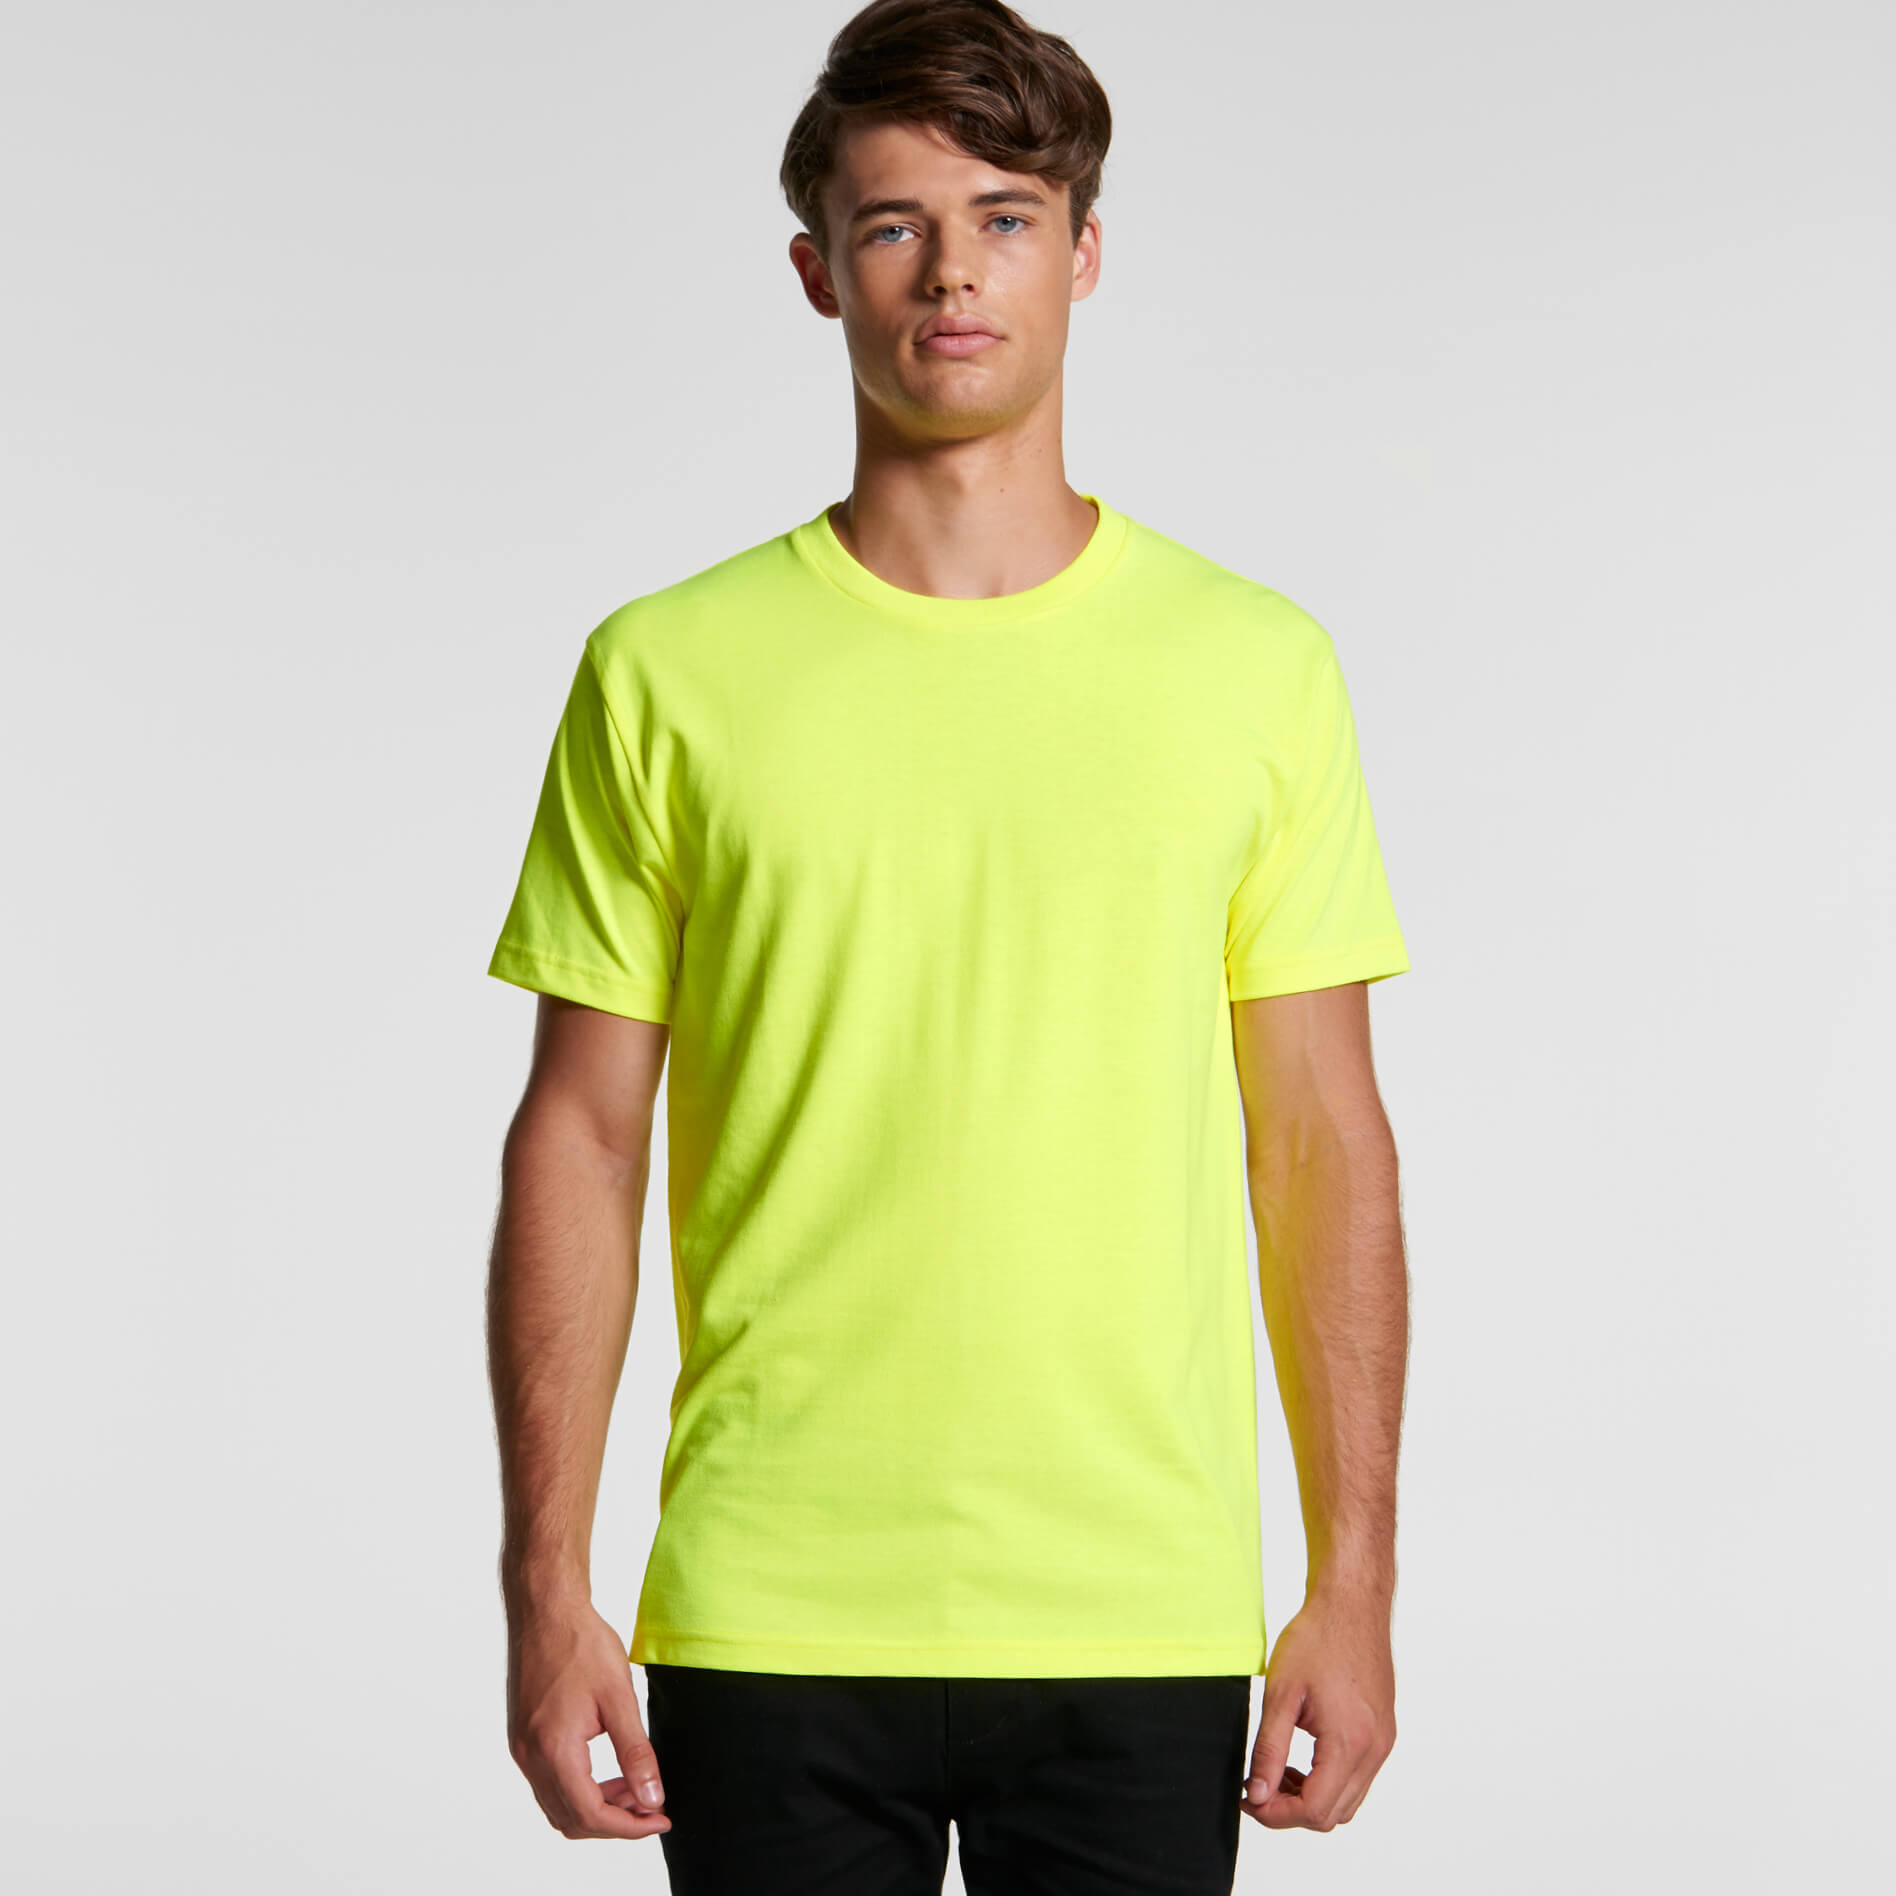 Mens Block Tee (Safety Colours) - 5050f